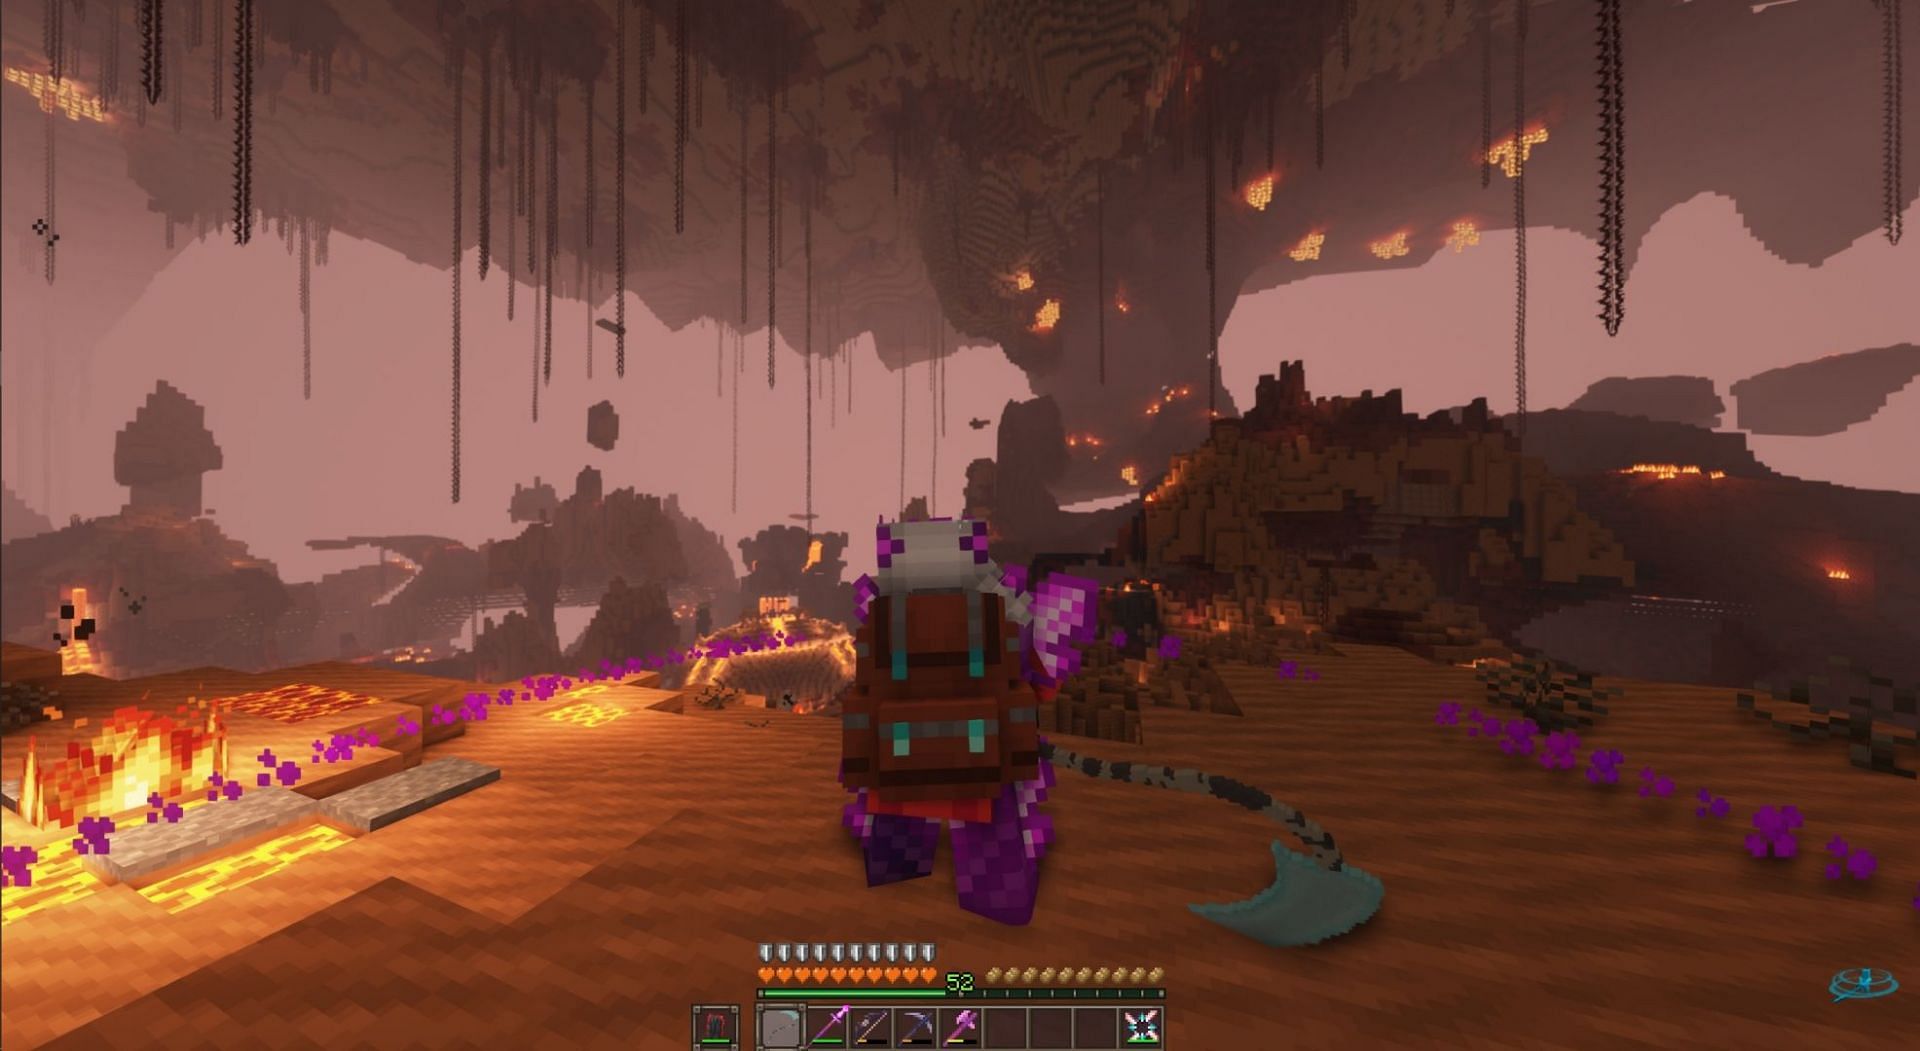 DawnCraft introduces a challenging RPG experience to Minecraft (Image via Bstylia14/CurseForge)